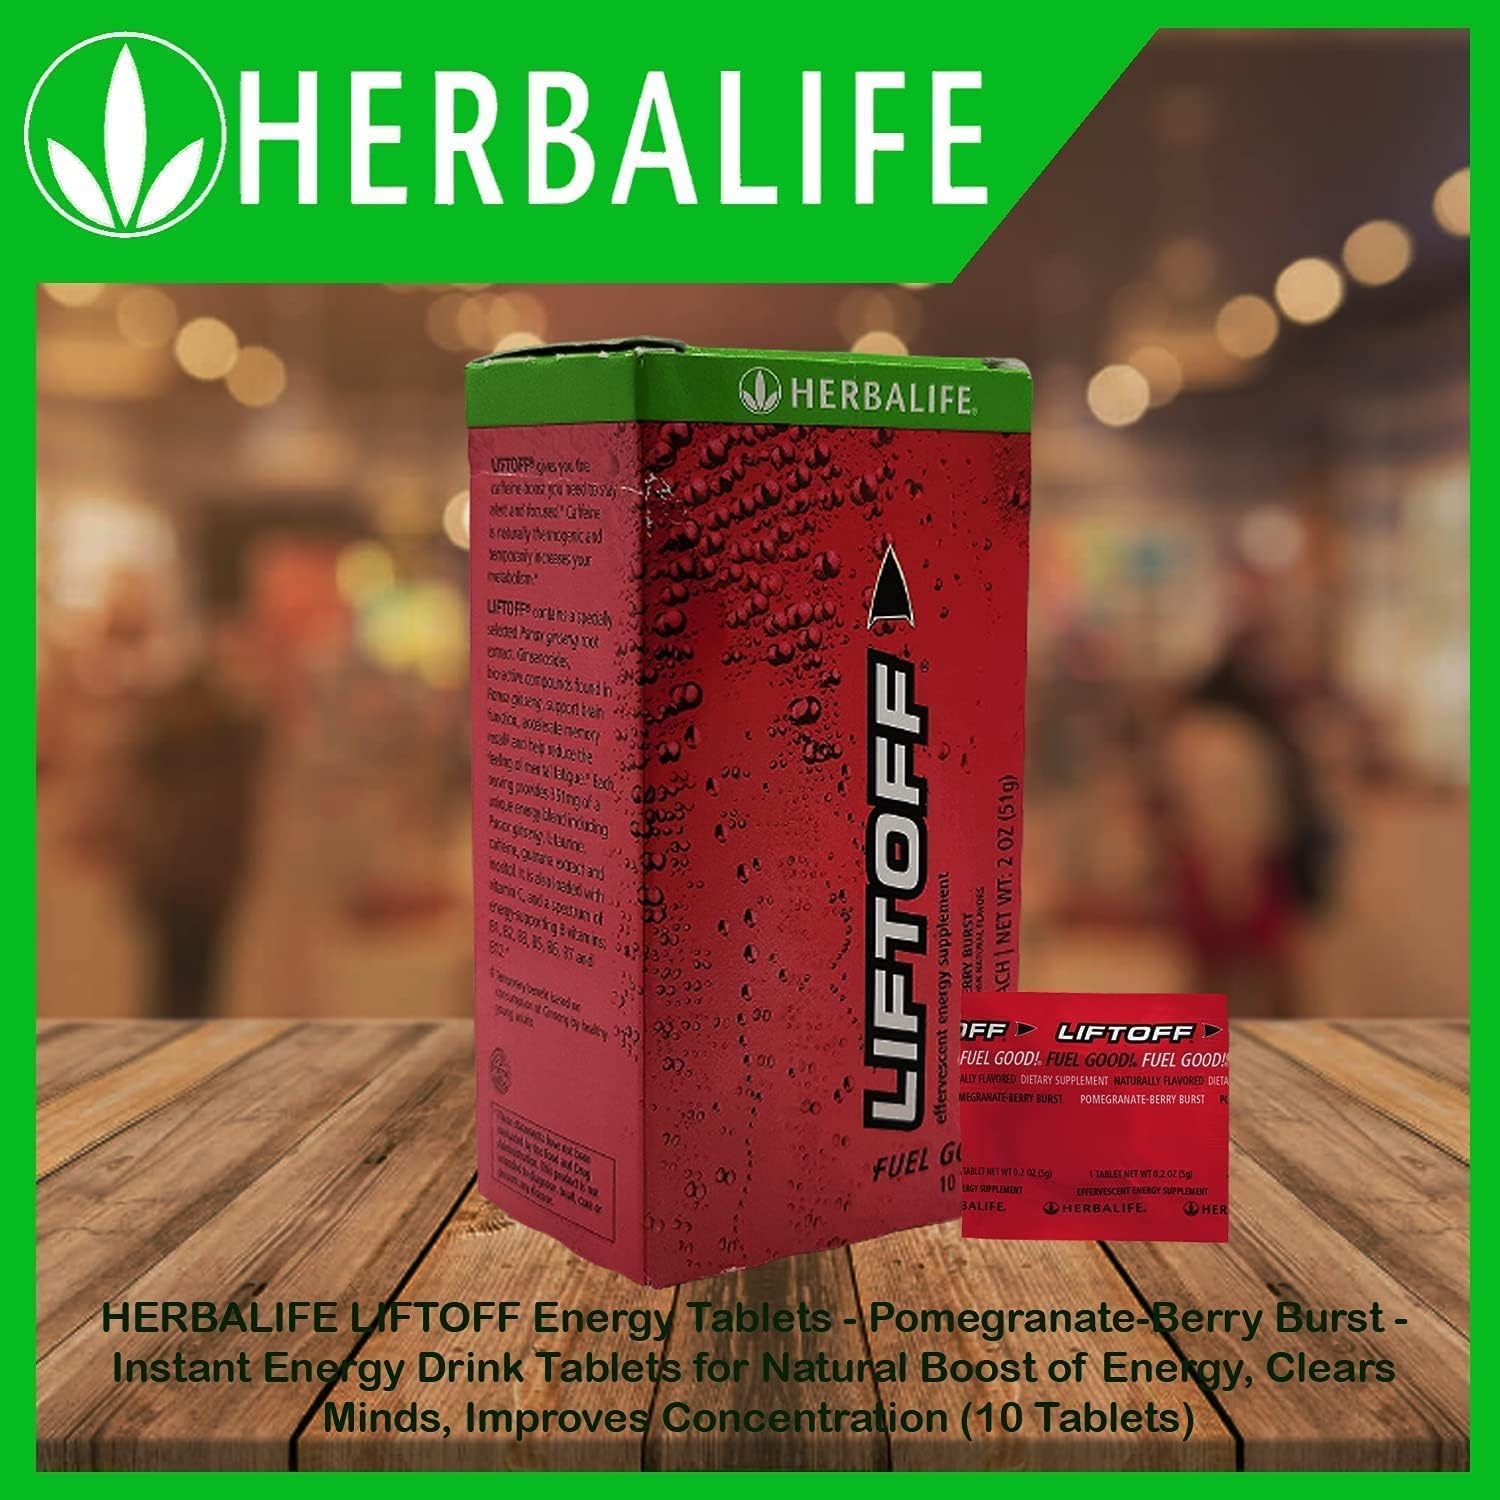 Herbalife Liftoff-Energy Drink, Pomegranate-Berry Burst, 10 Tablets